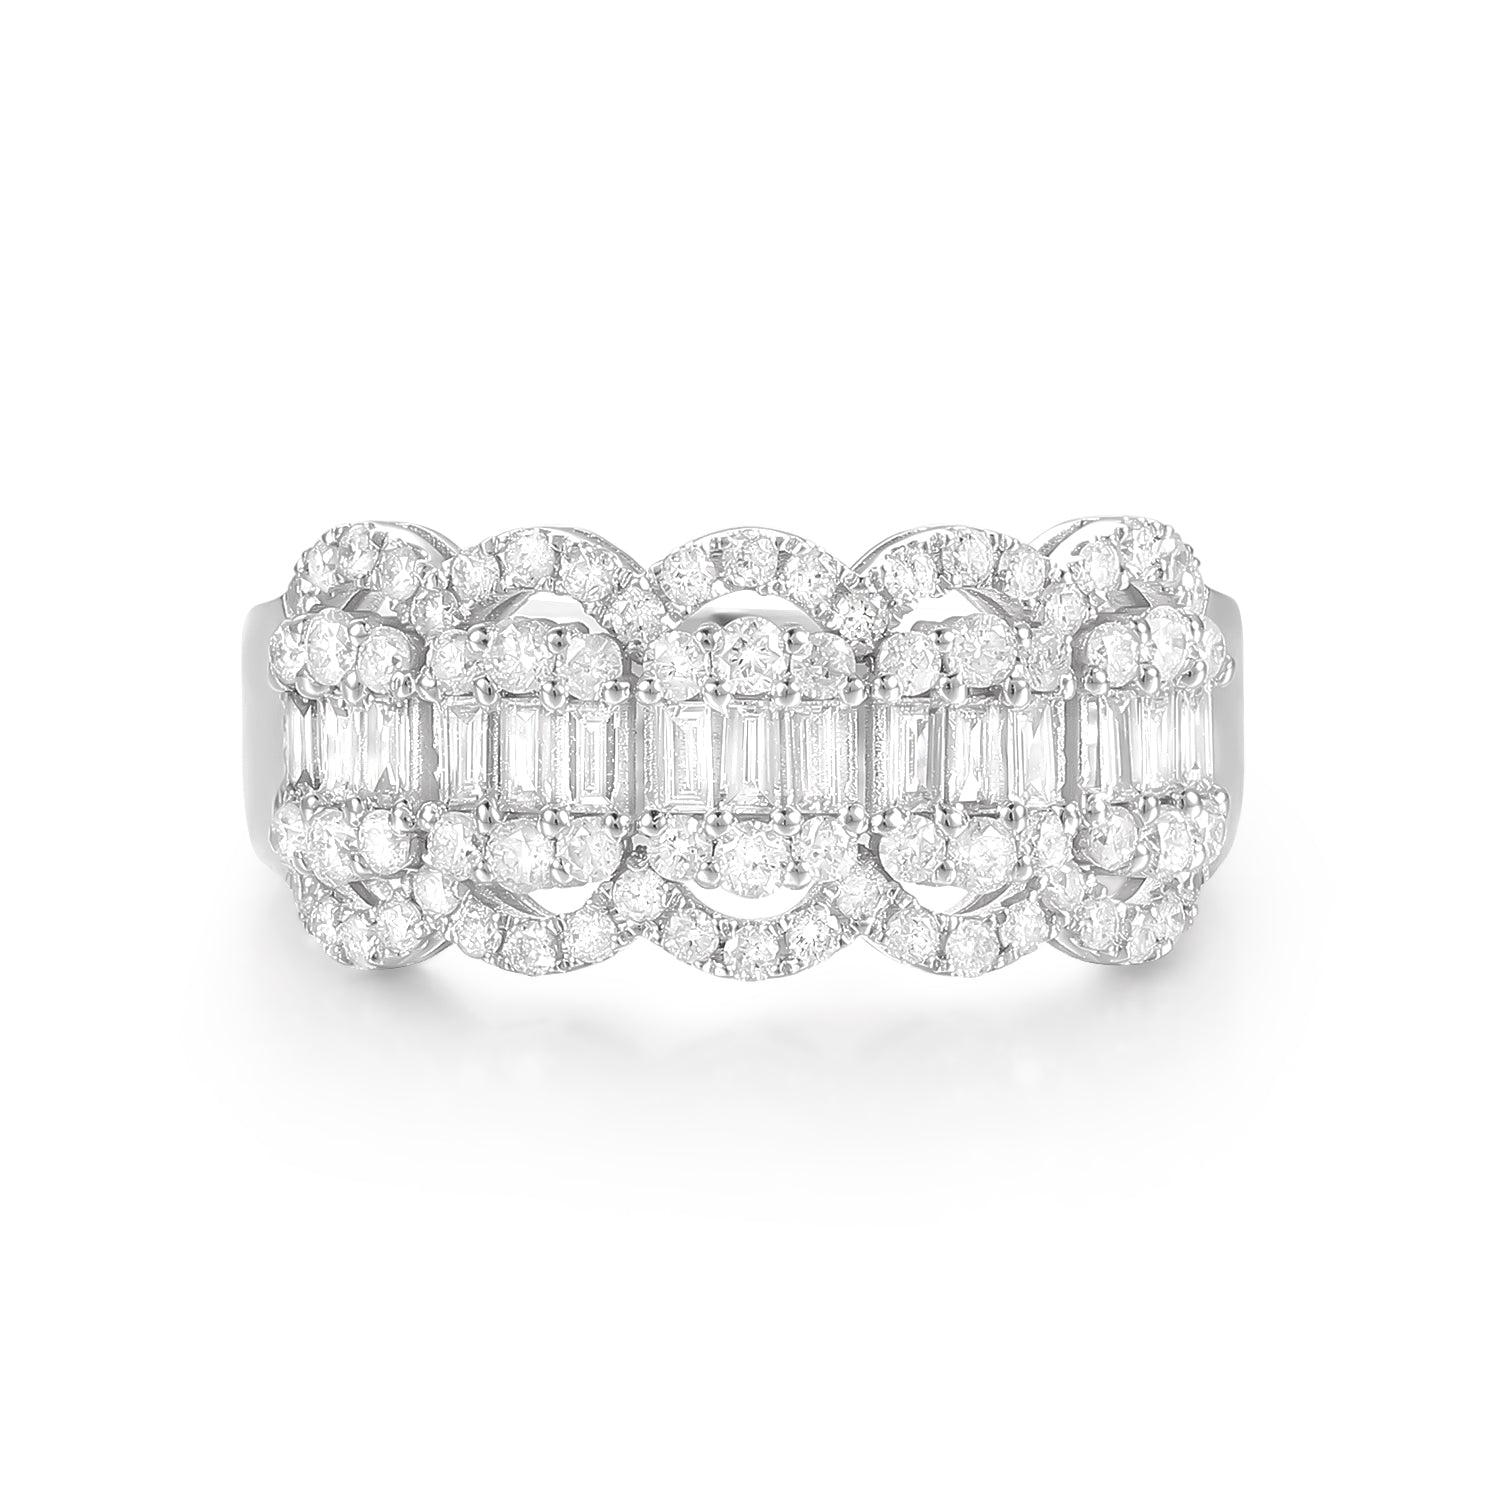 Alternating Baguette and Round Diamond Graduated Ring | Poyas Jewelry